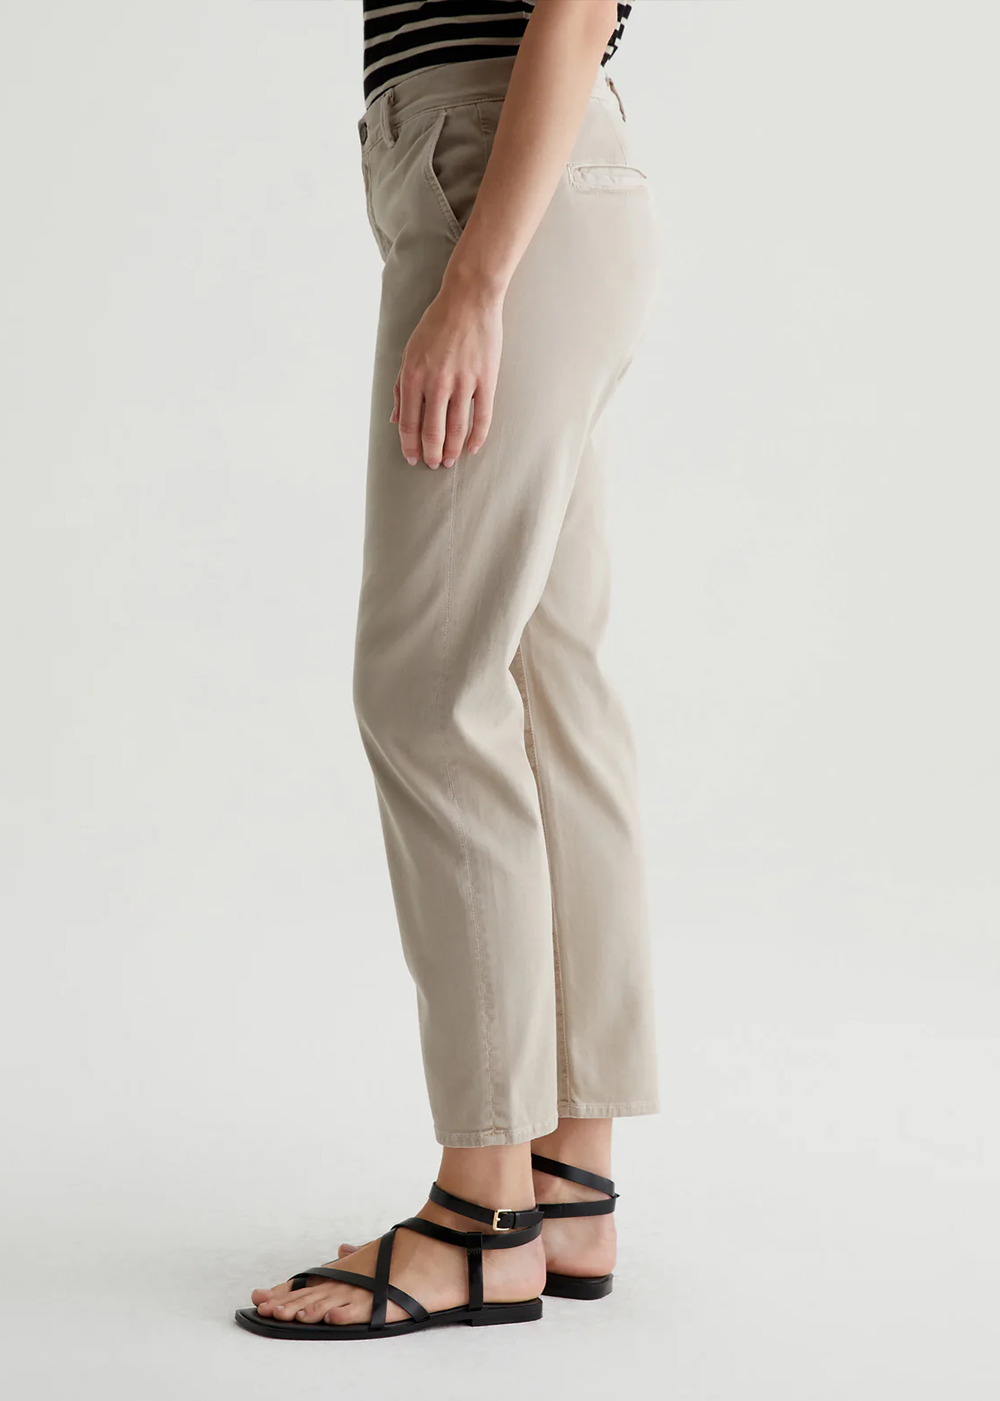 Caden Tailored Trousers - Sulfur Flax - AG Jeans Canada - Danali - SBW1613SLFLAX